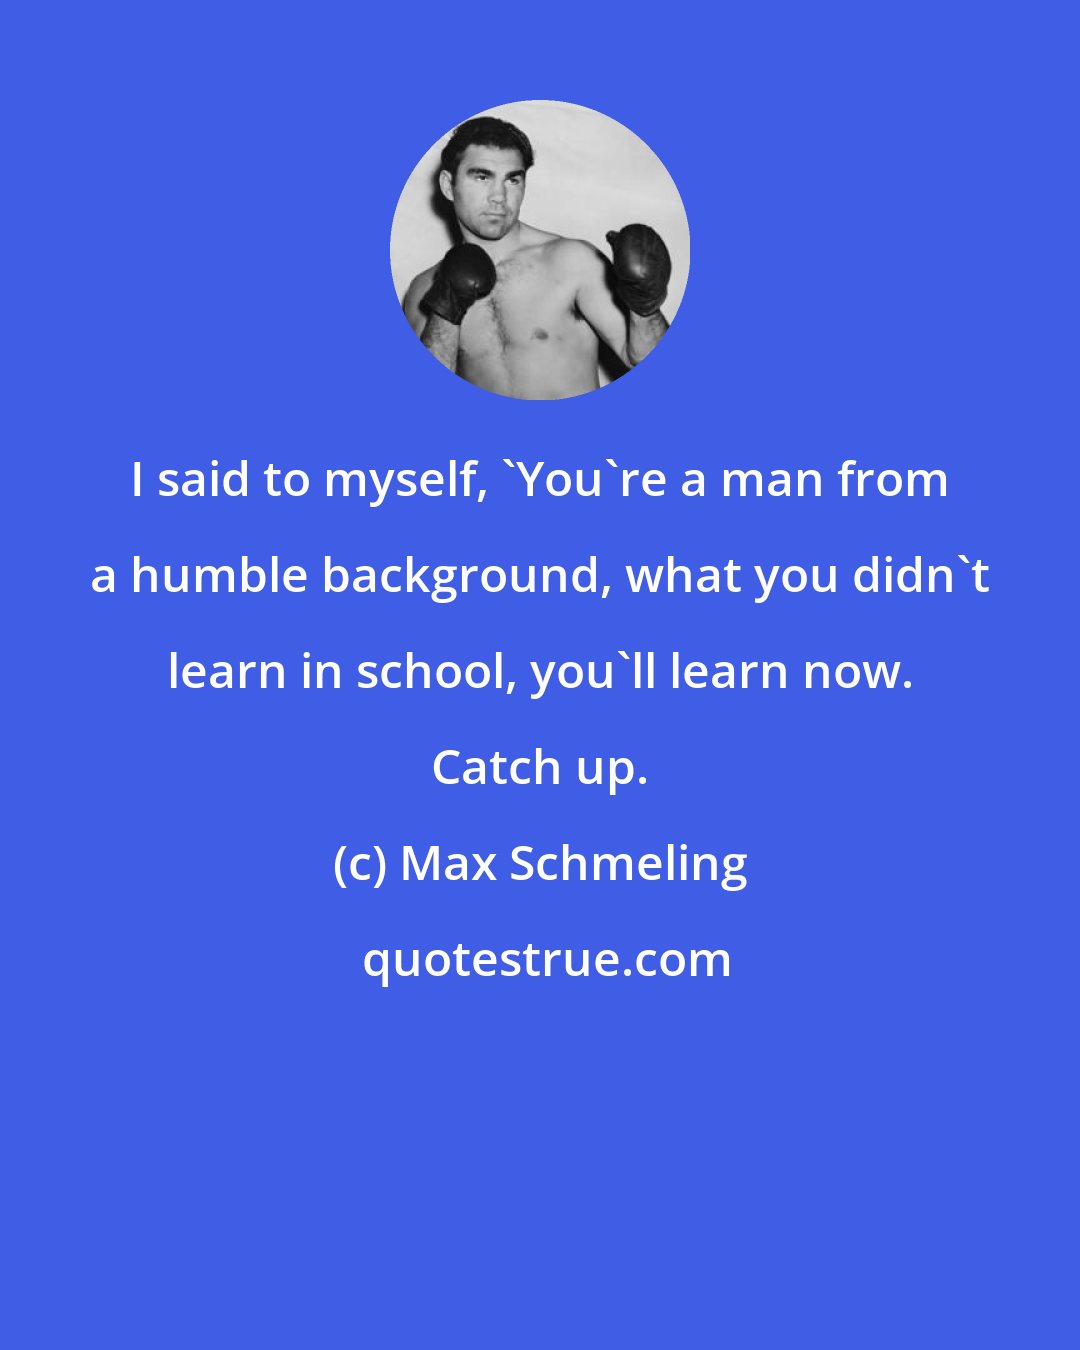 Max Schmeling: I said to myself, 'You're a man from a humble background, what you didn't learn in school, you'll learn now. Catch up.